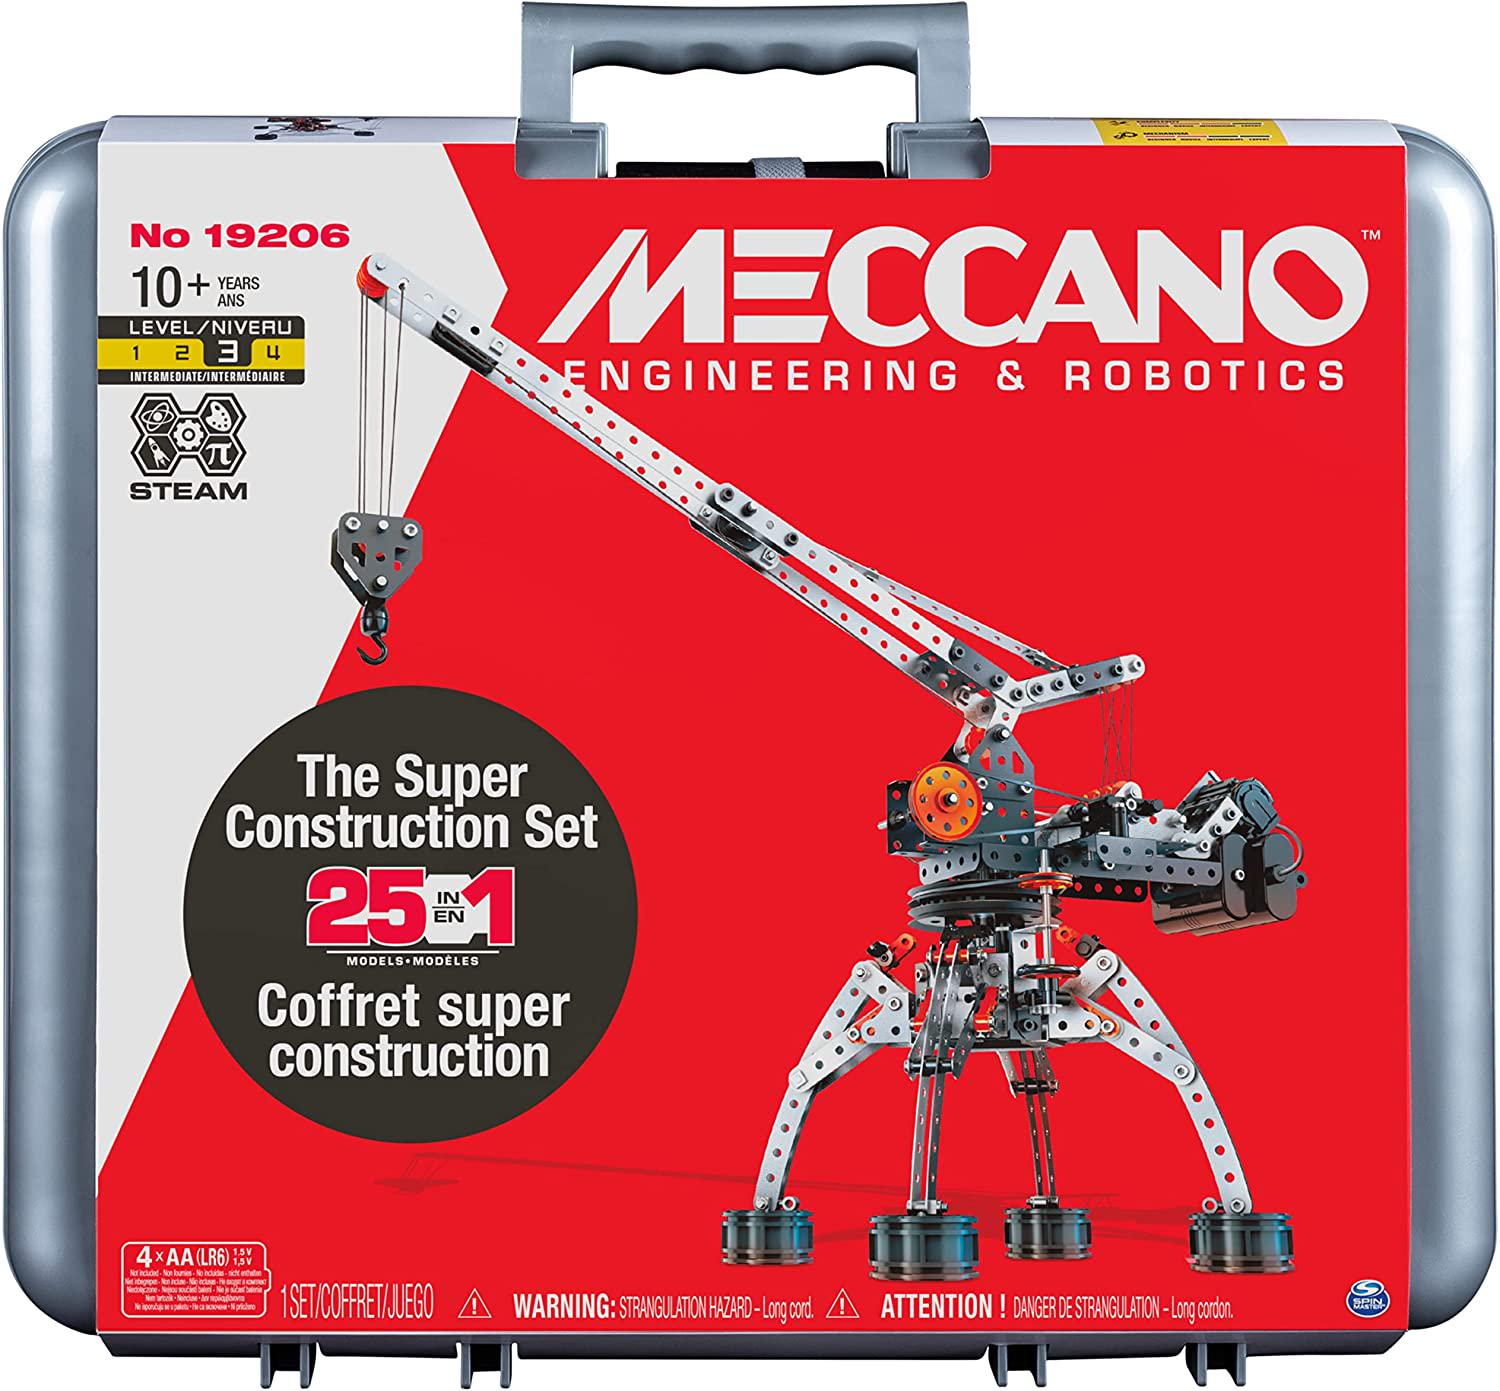 MECCANO, Meccano, Super Construction 25-in-1 Motorized Building Set, STEAM Education Toy, 638 Parts, for Ages 10+